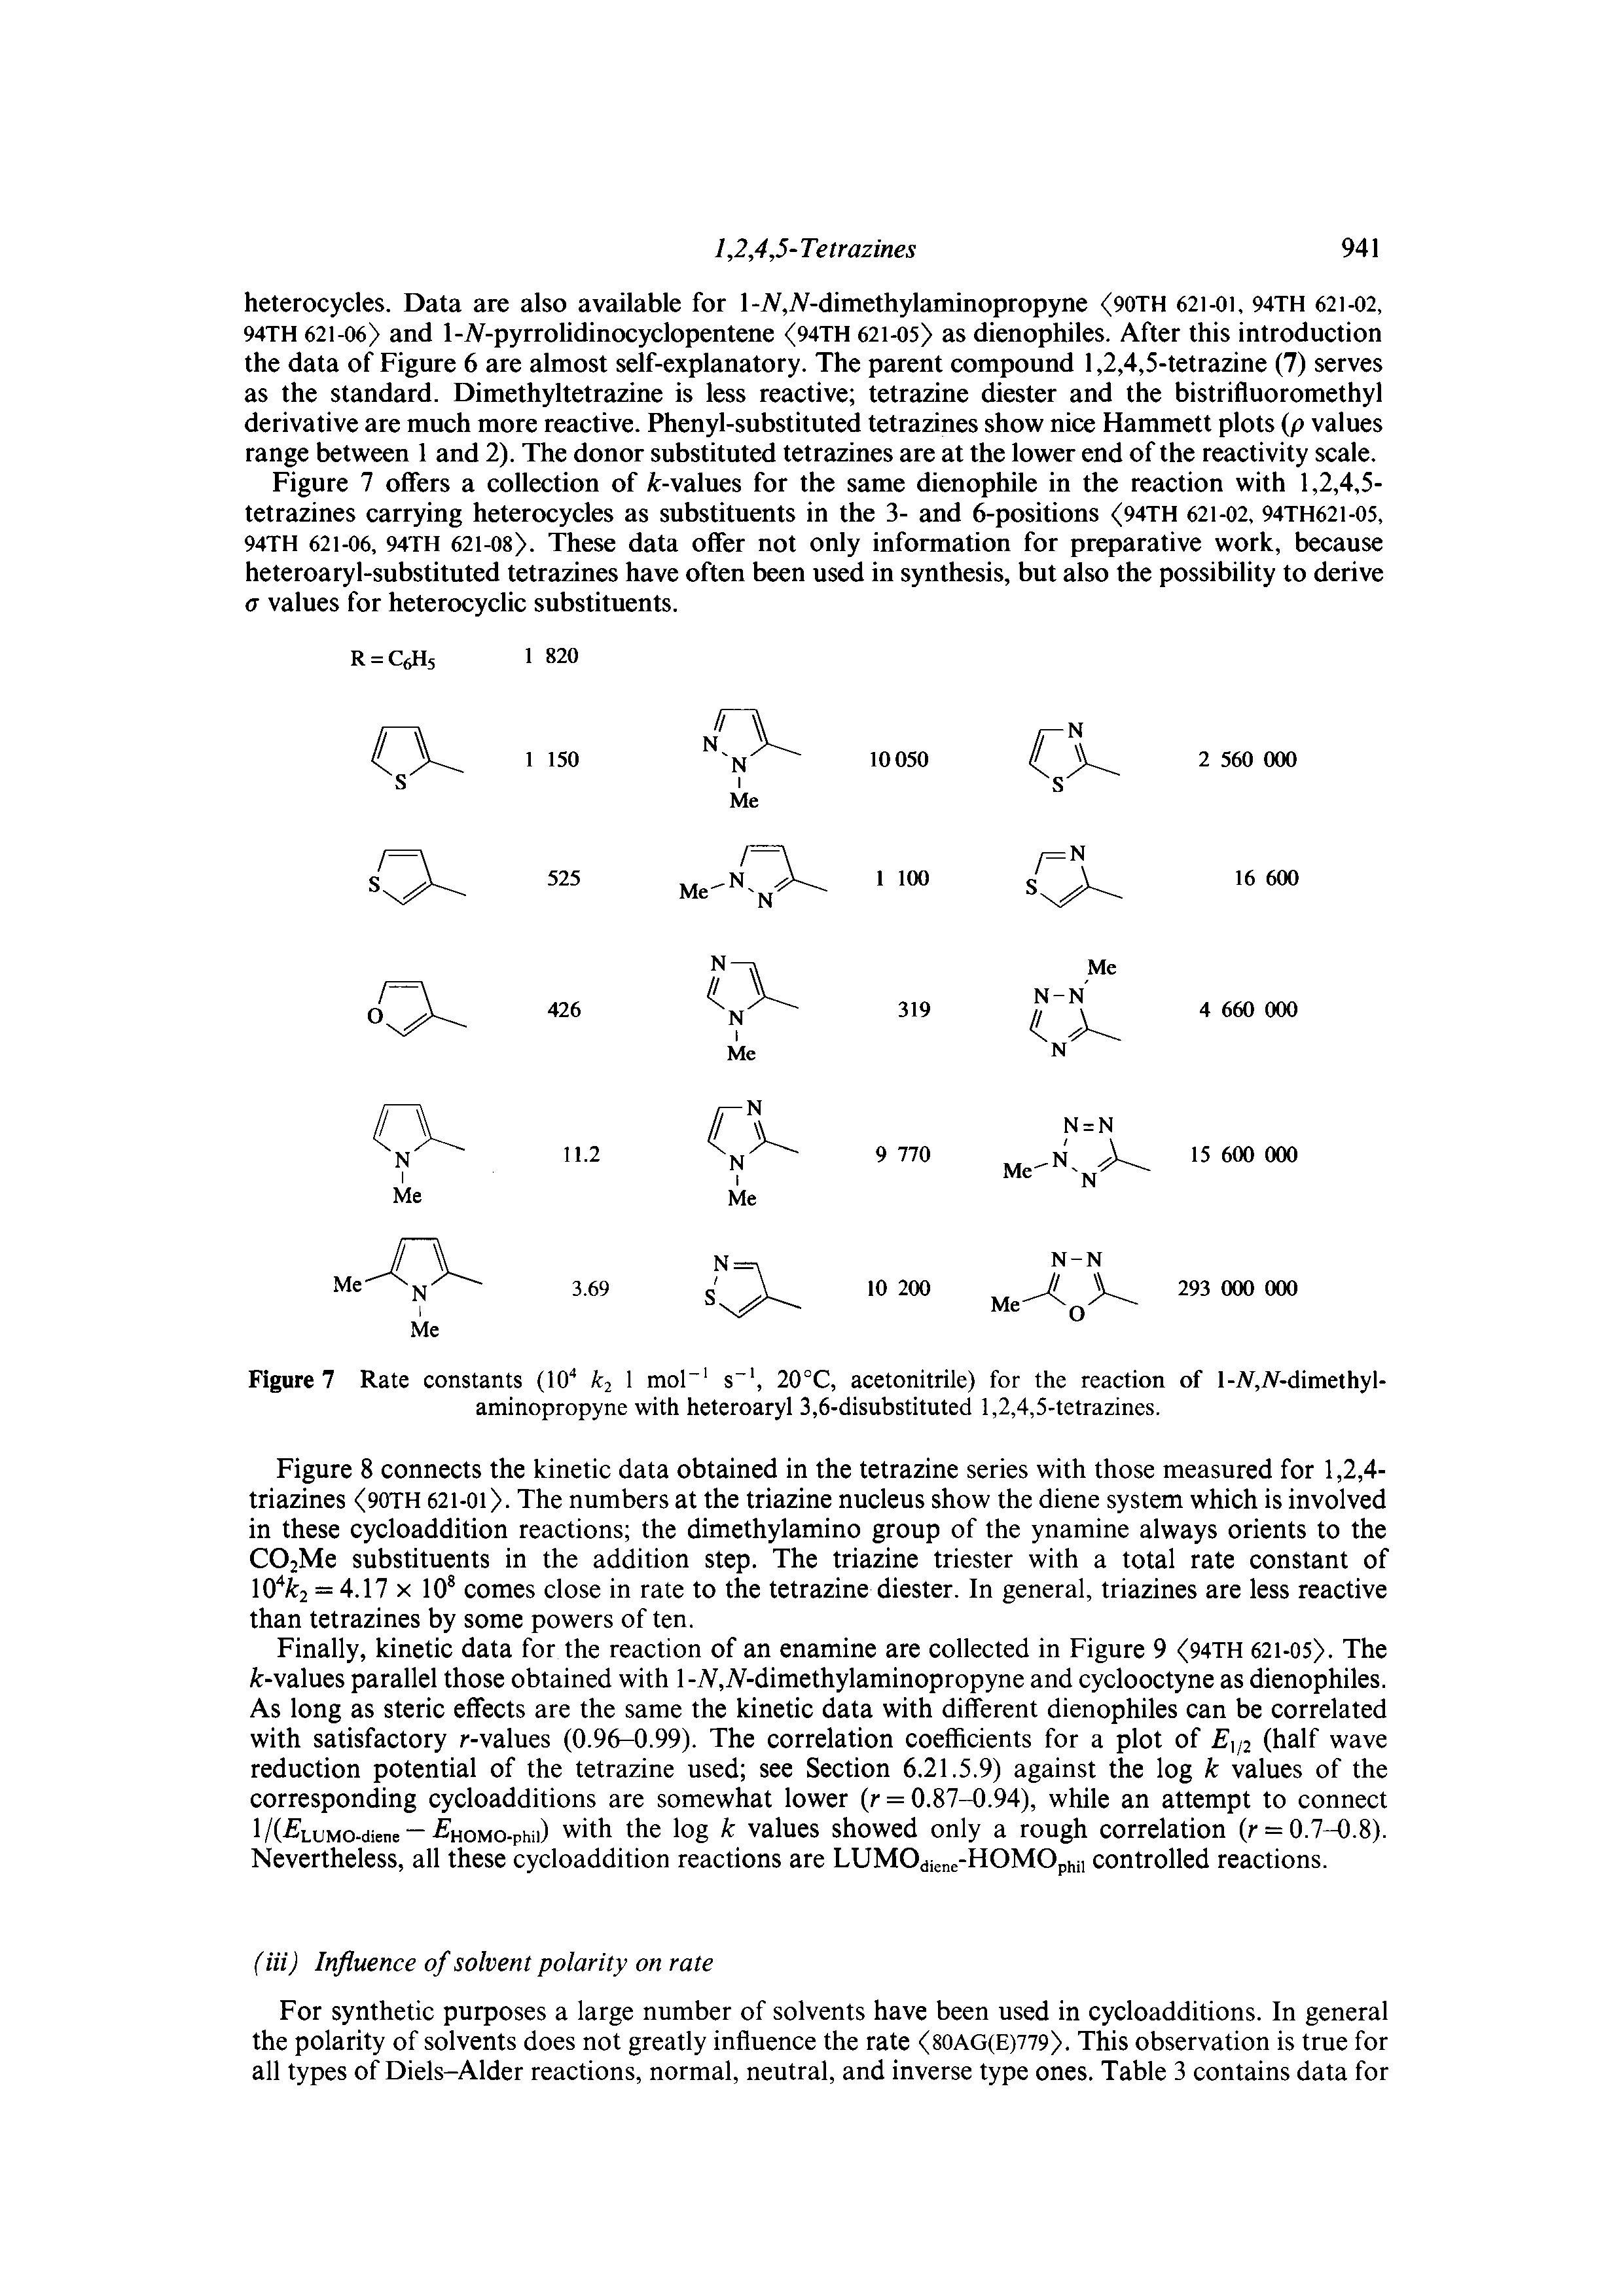 Figure 7 Rate constants (10 Aj 1 mol s , 20°C, acetonitrile) for the reaction of l-iV,iV-dimethyl-aminopropyne with heteroaryl 3,6-disubstituted 1,2,4,5-tetrazines.